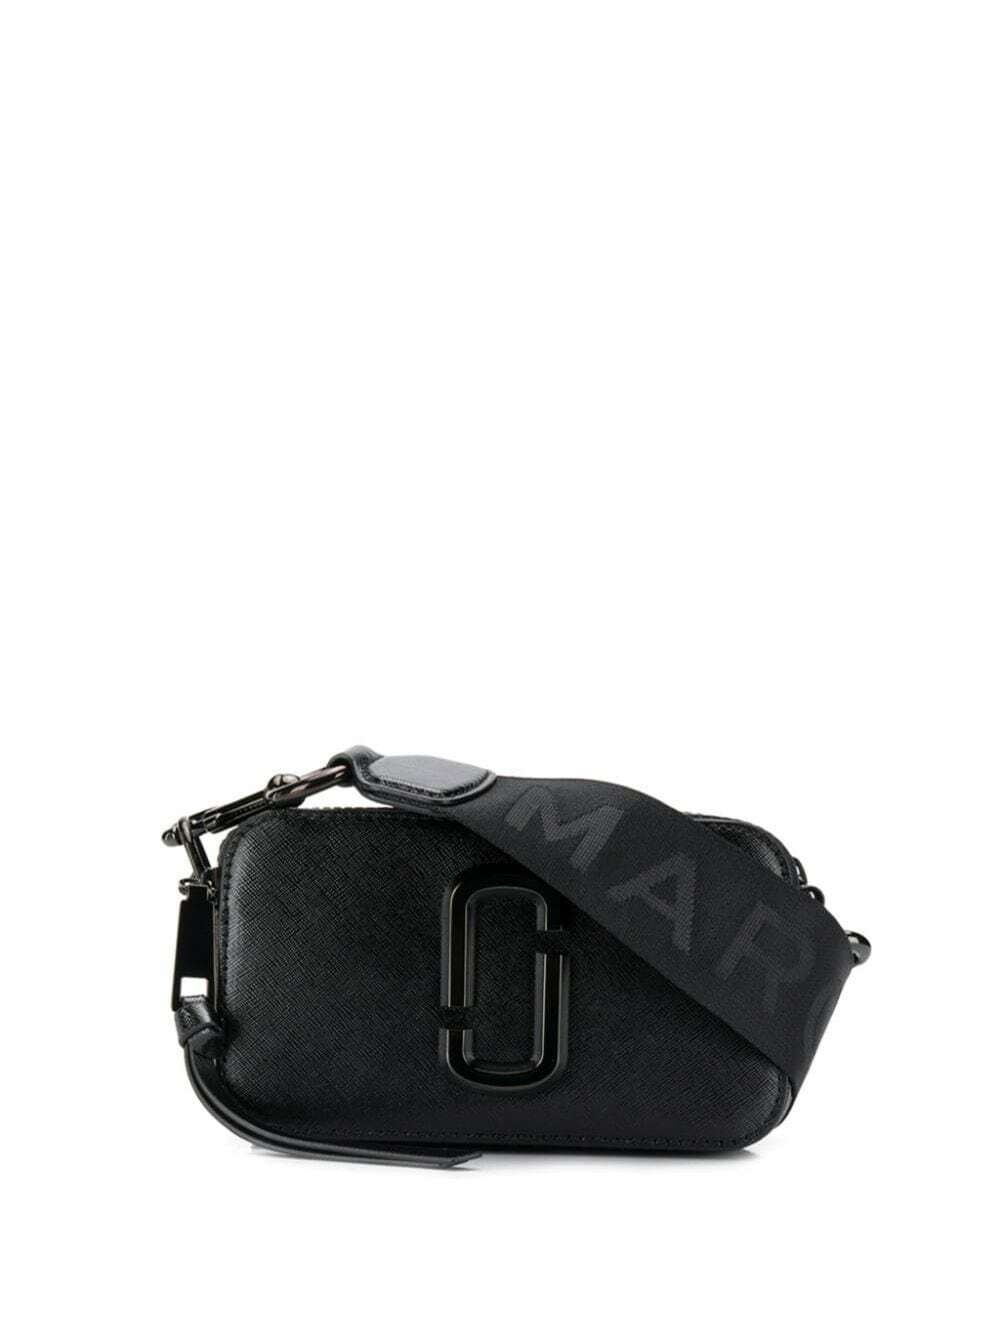 The Snapshot Crossbody - Marc Jacobs - Black - Leather